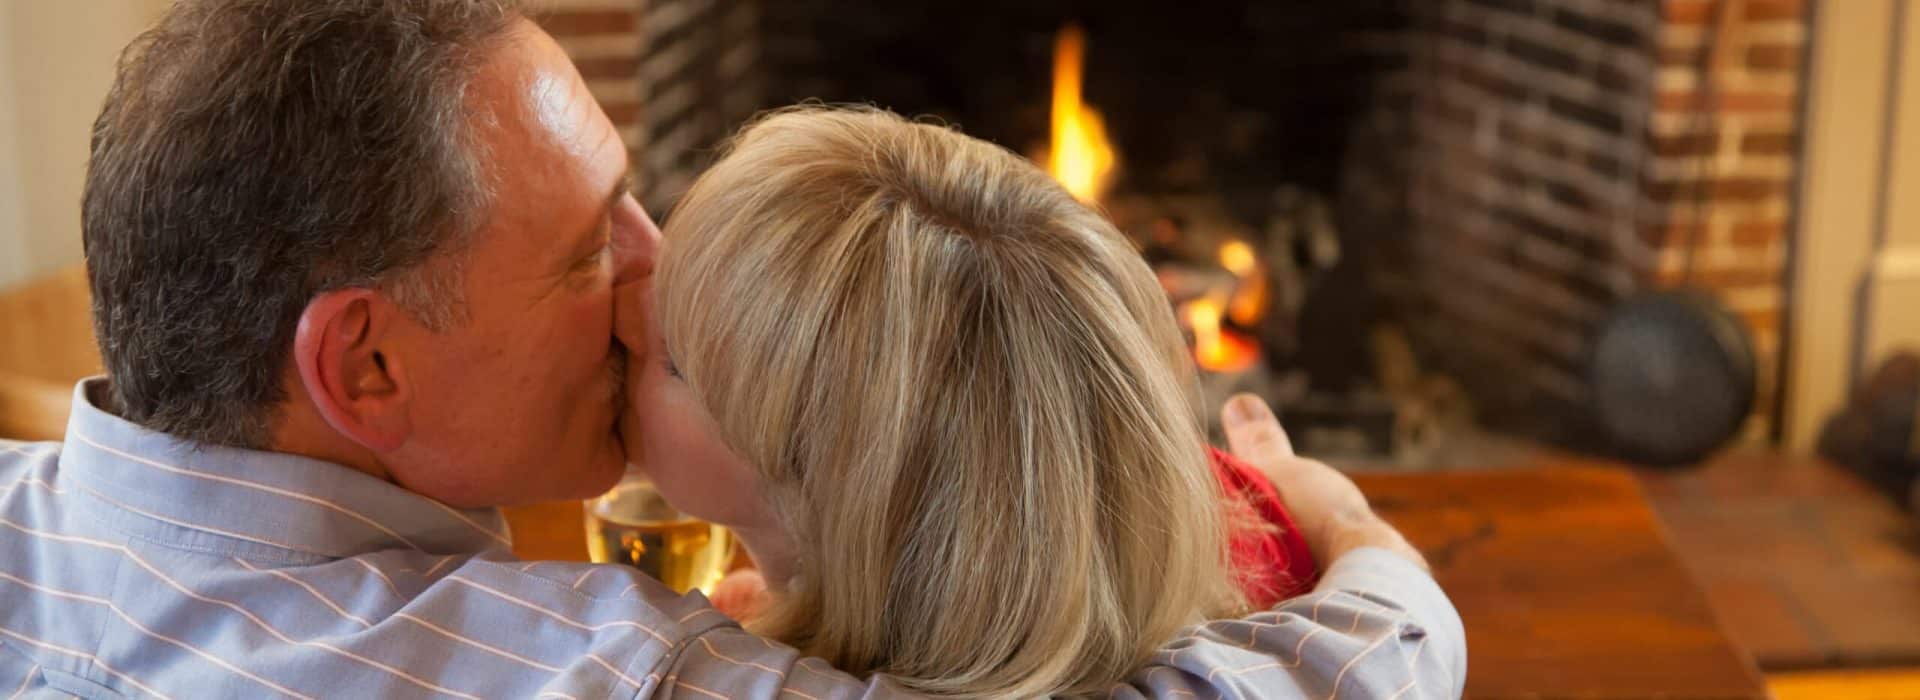 couple kissing in front of a fireplace|Best Romantic Vermont Weekend Getaways